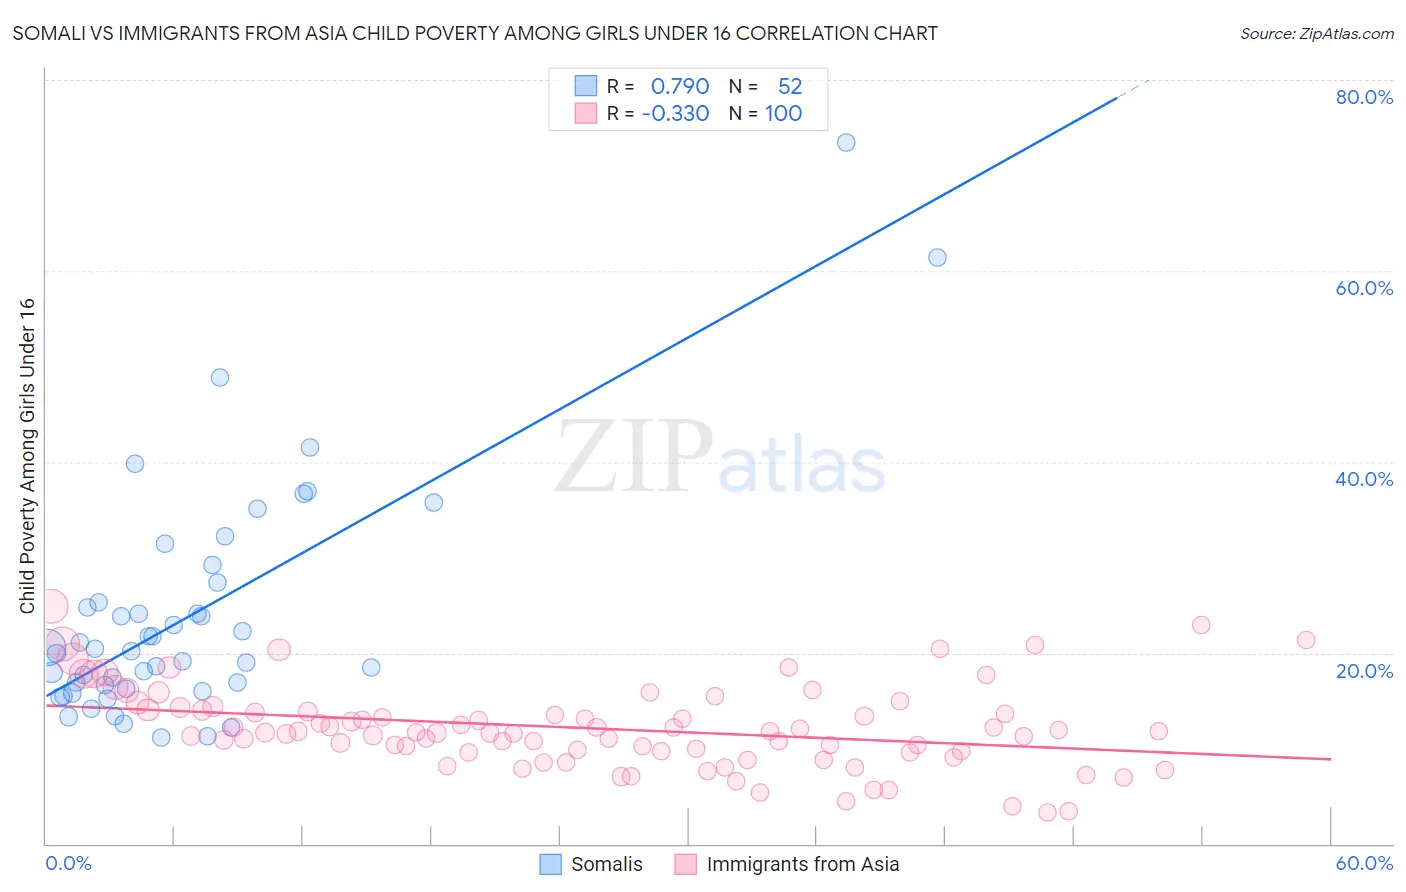 Somali vs Immigrants from Asia Child Poverty Among Girls Under 16